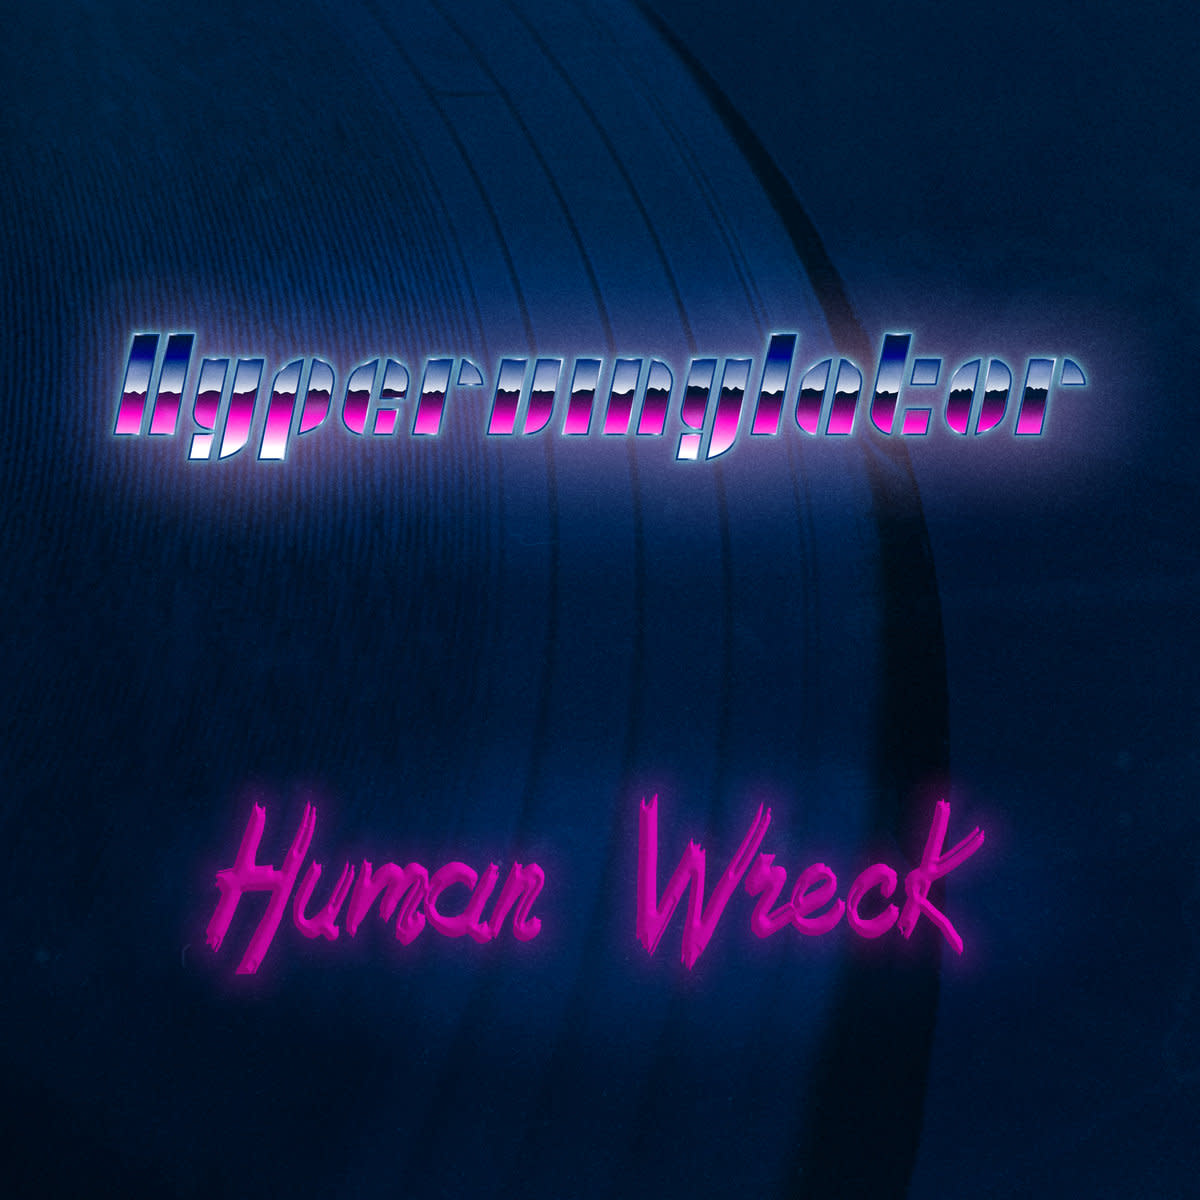 synth-album-review-human-wreck-by-hypervinylator-and-guests